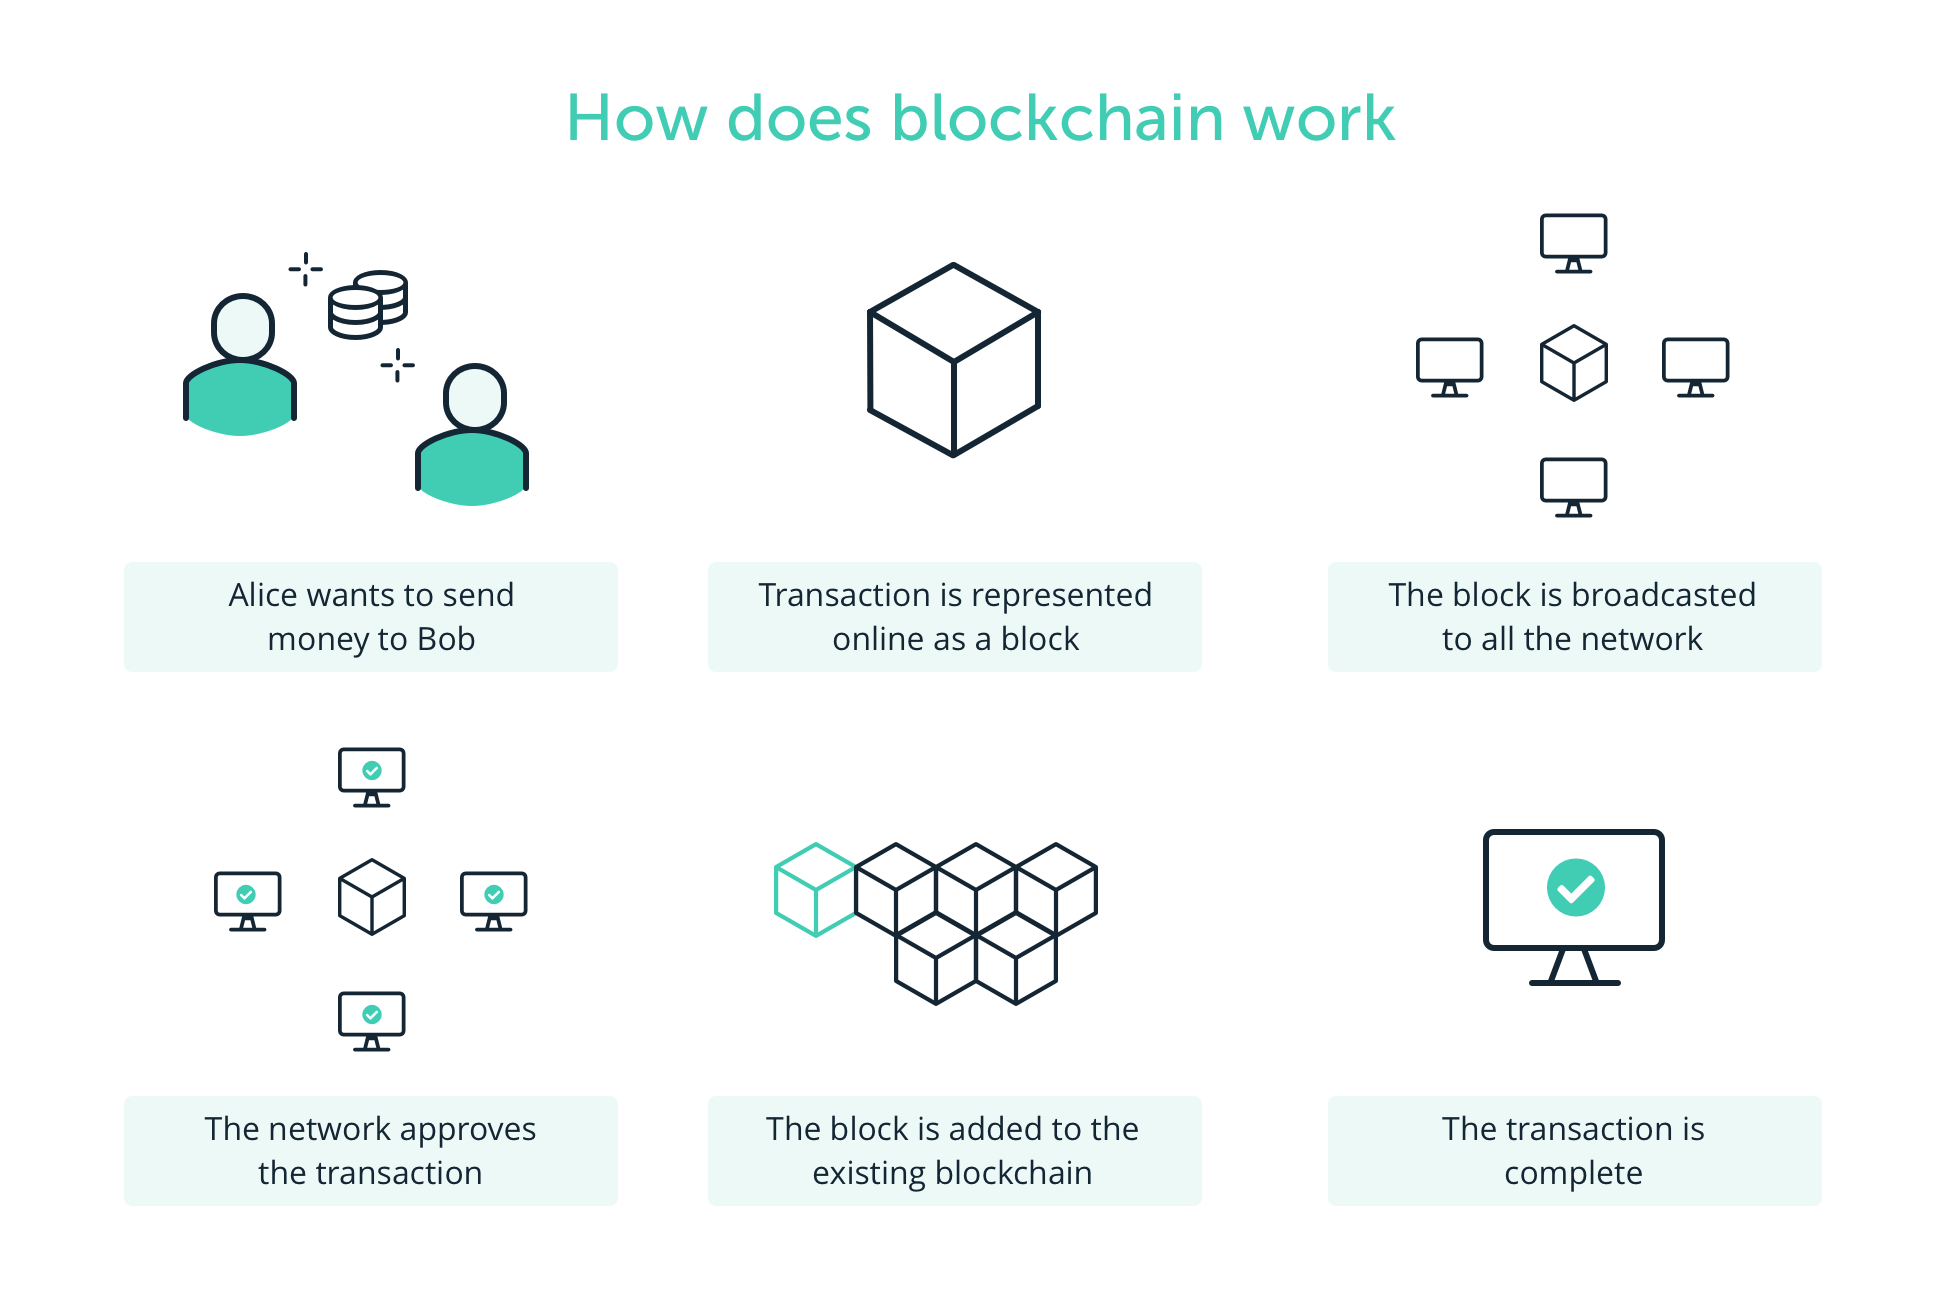 which of the following is used to point a block in blockchain